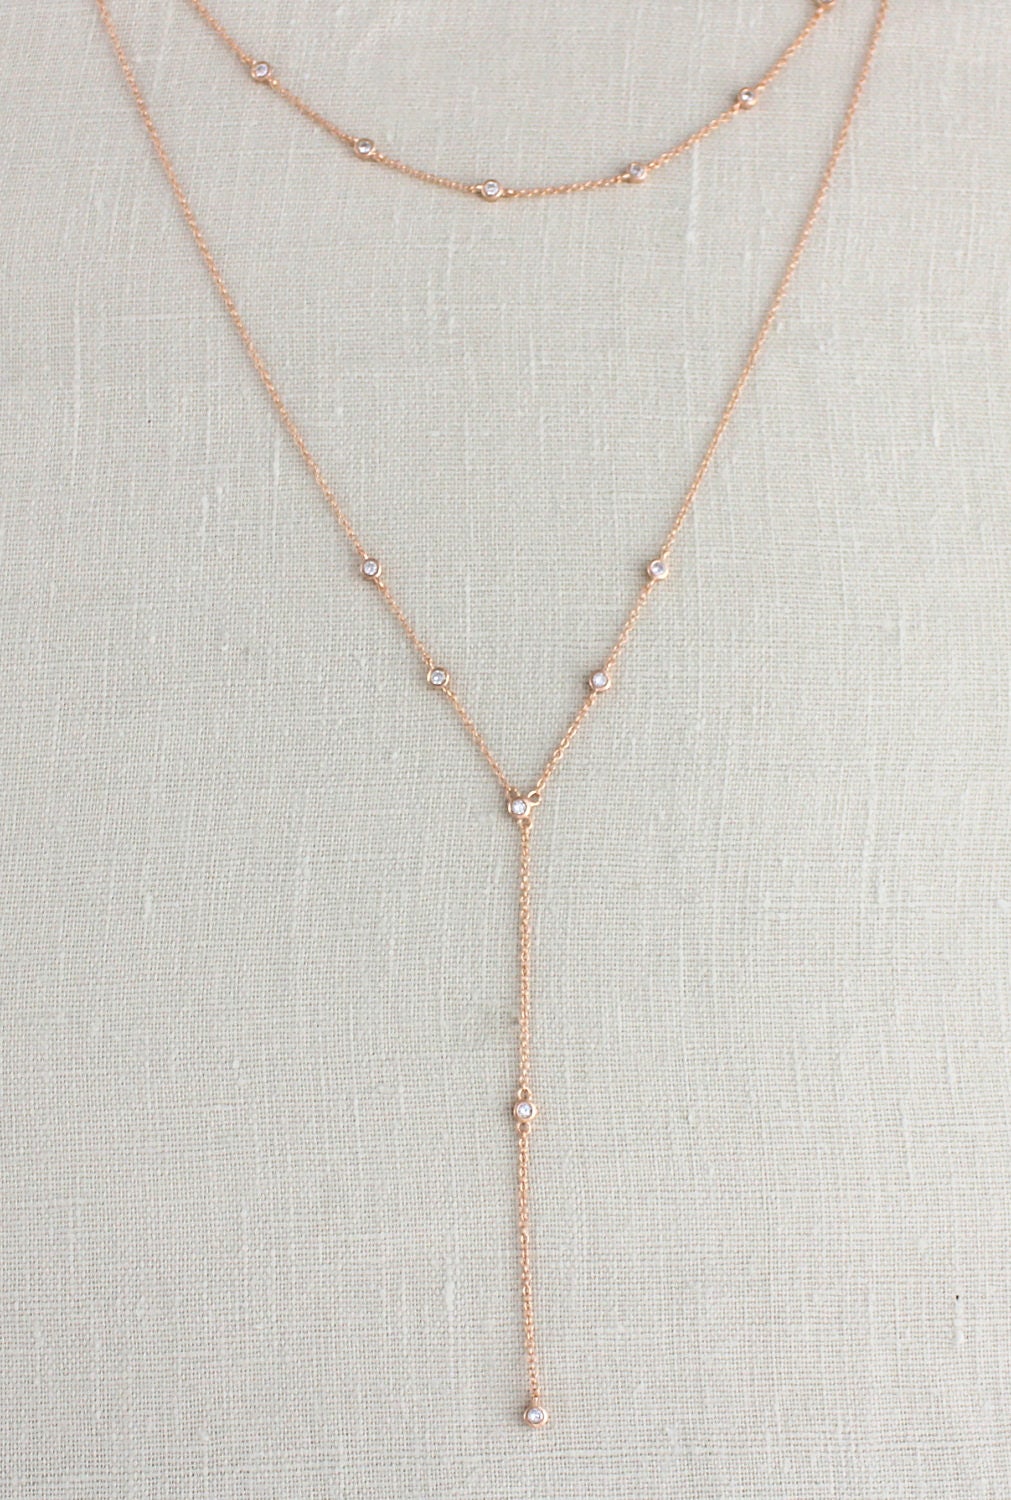 Delicate Rose gold Layering necklace Choker necklace Dainty | Etsy